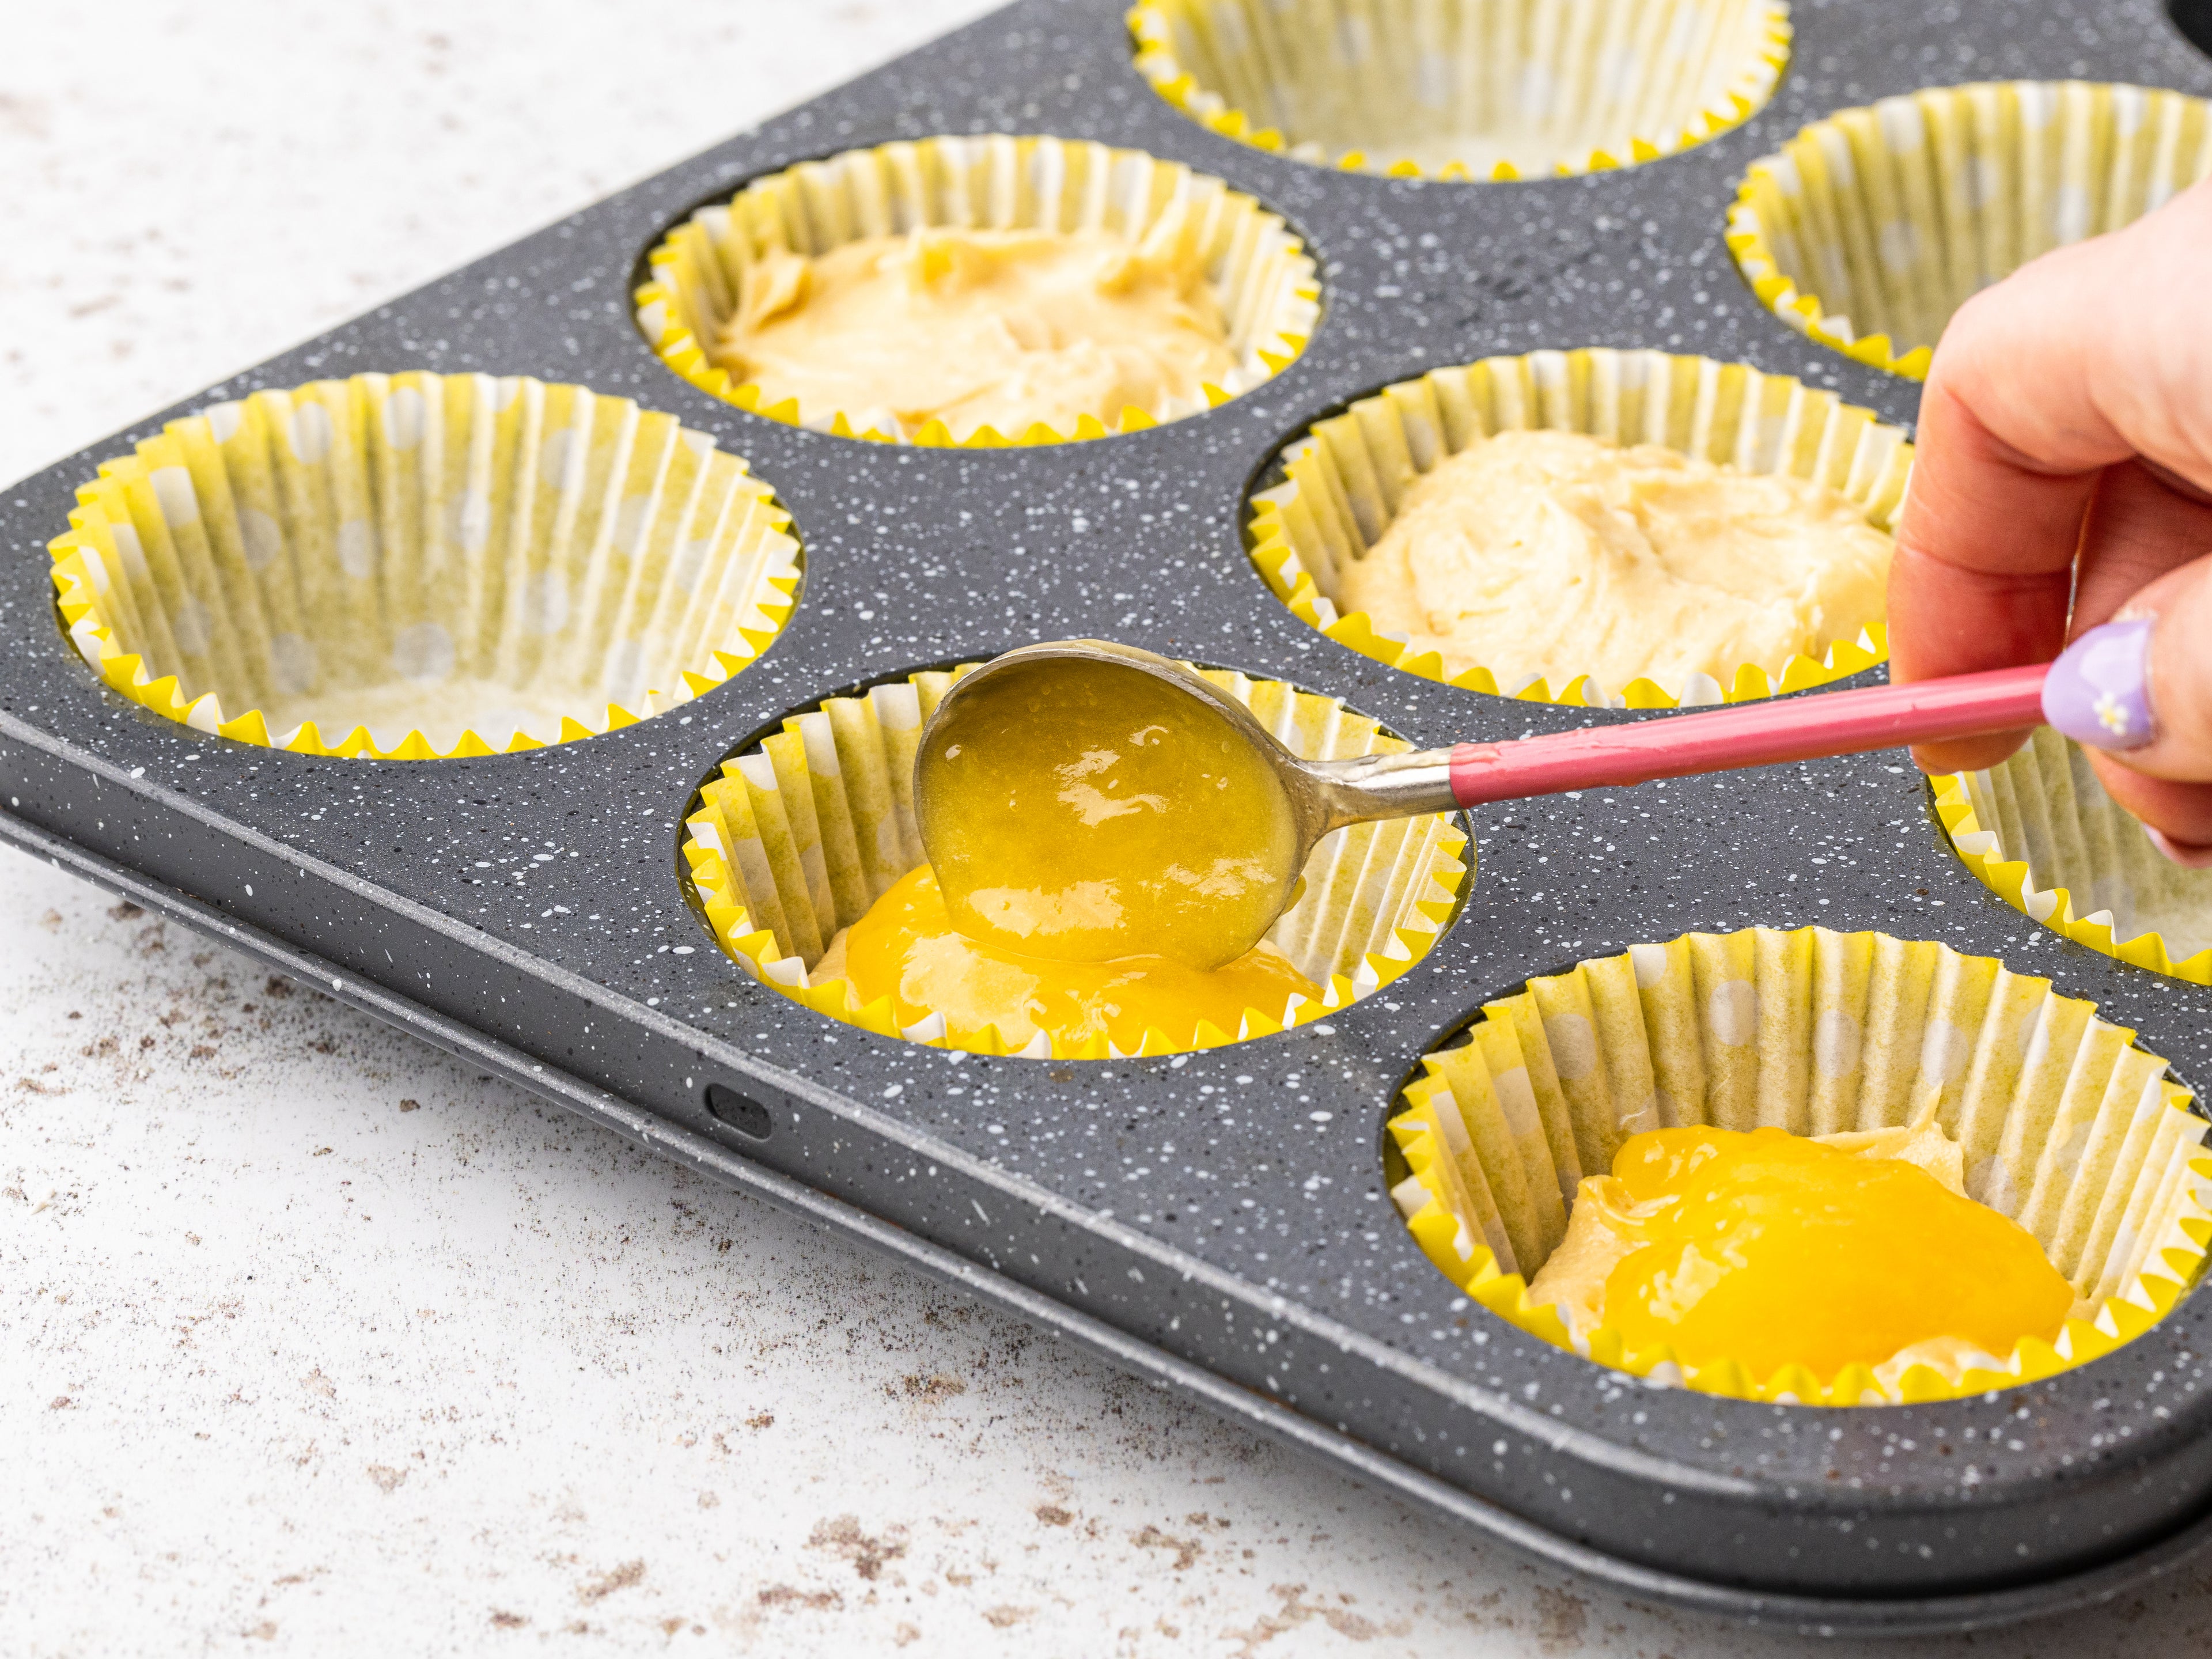 Lemon curd being spooned into cupcake cases on a baking tray